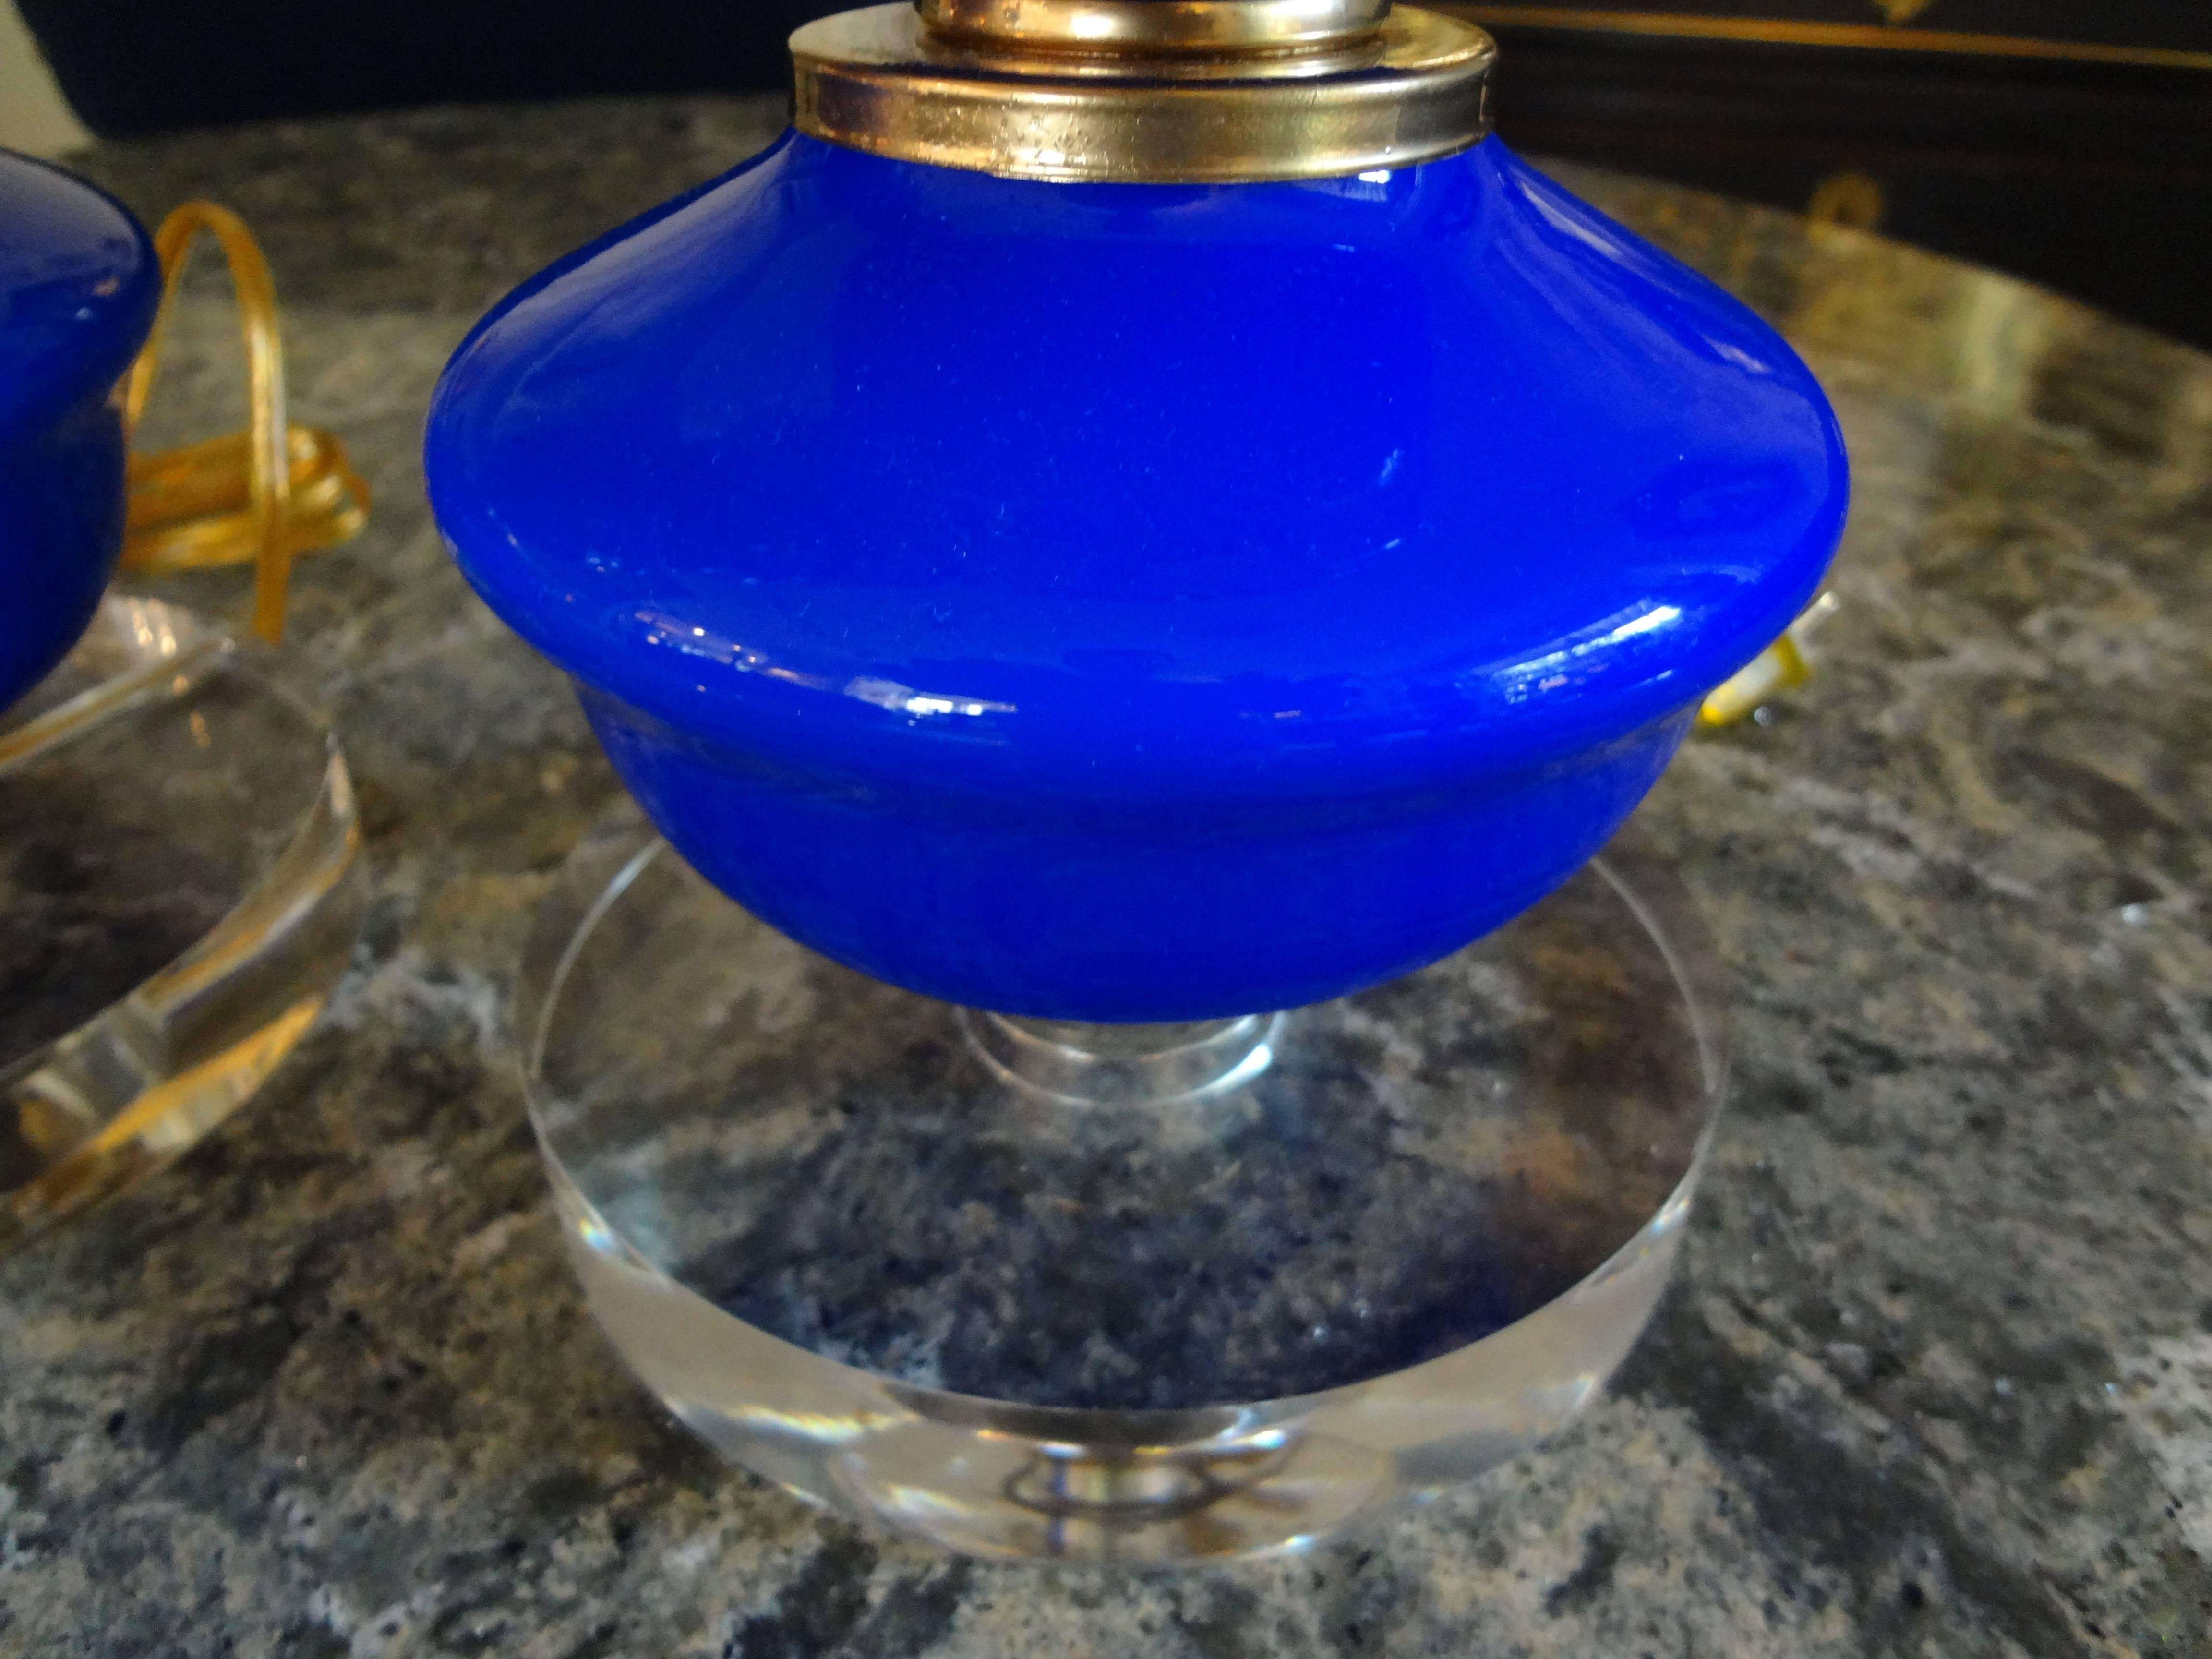 Hollywood Regency Pair of Cobalt Blue Murano Glass Lamps by Balboa